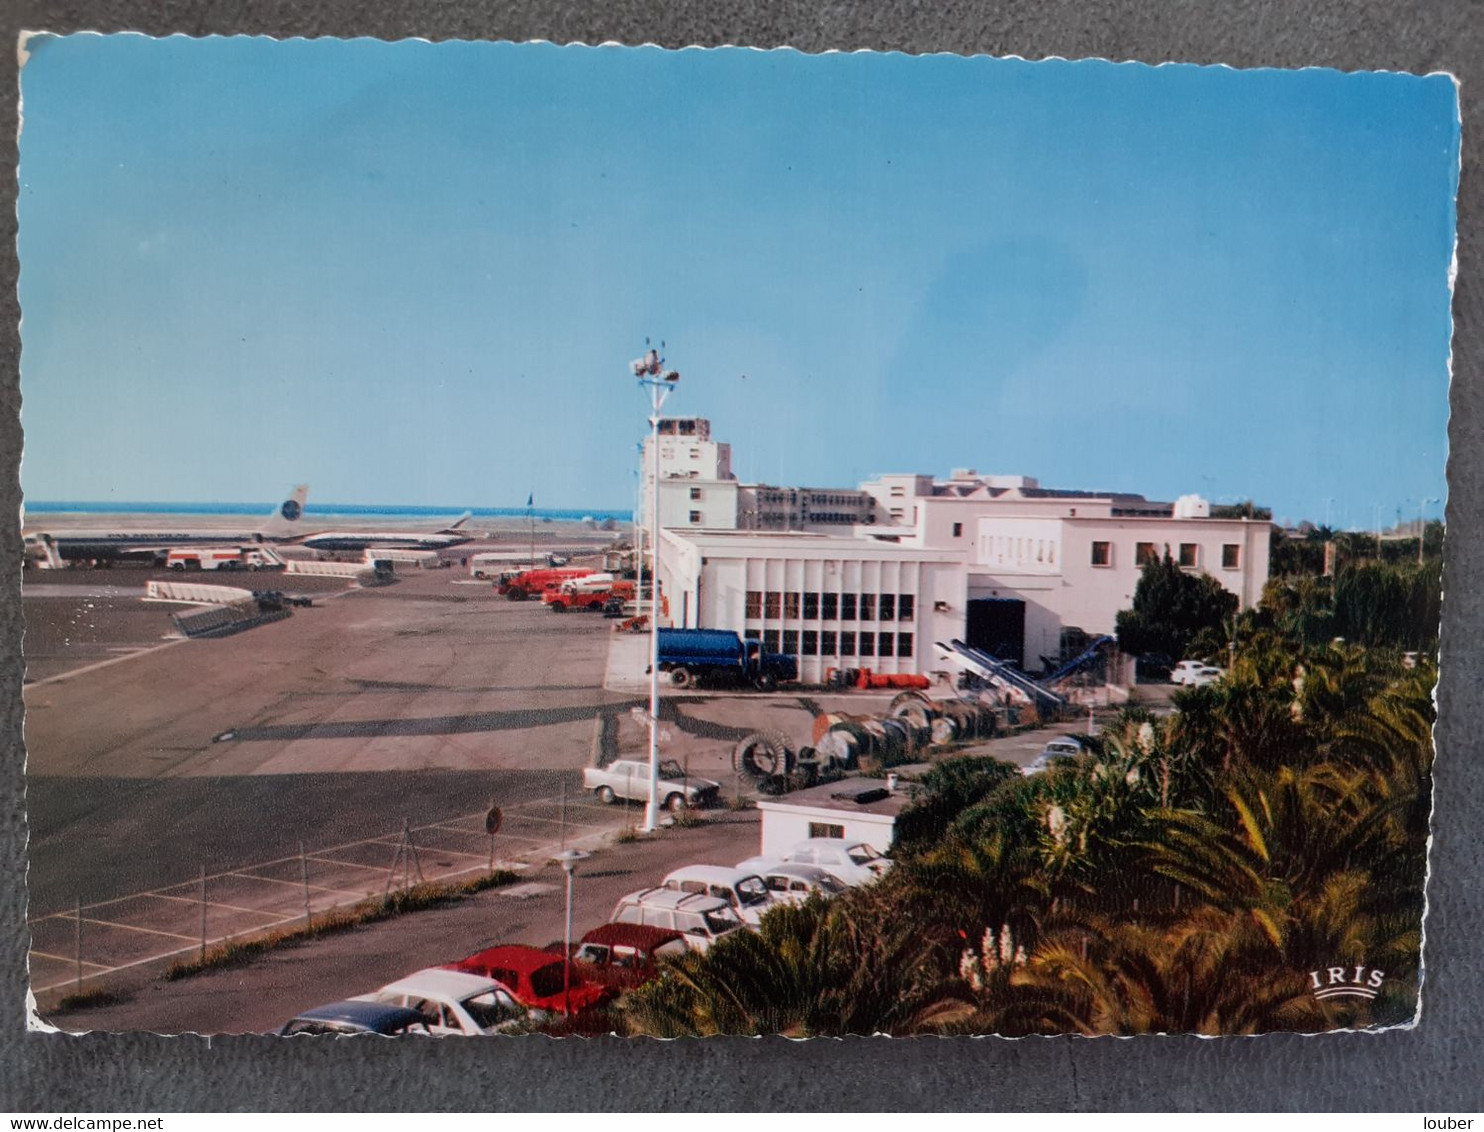 CPSM 06 NICE AEROPORT 1973 - Transport (air) - Airport